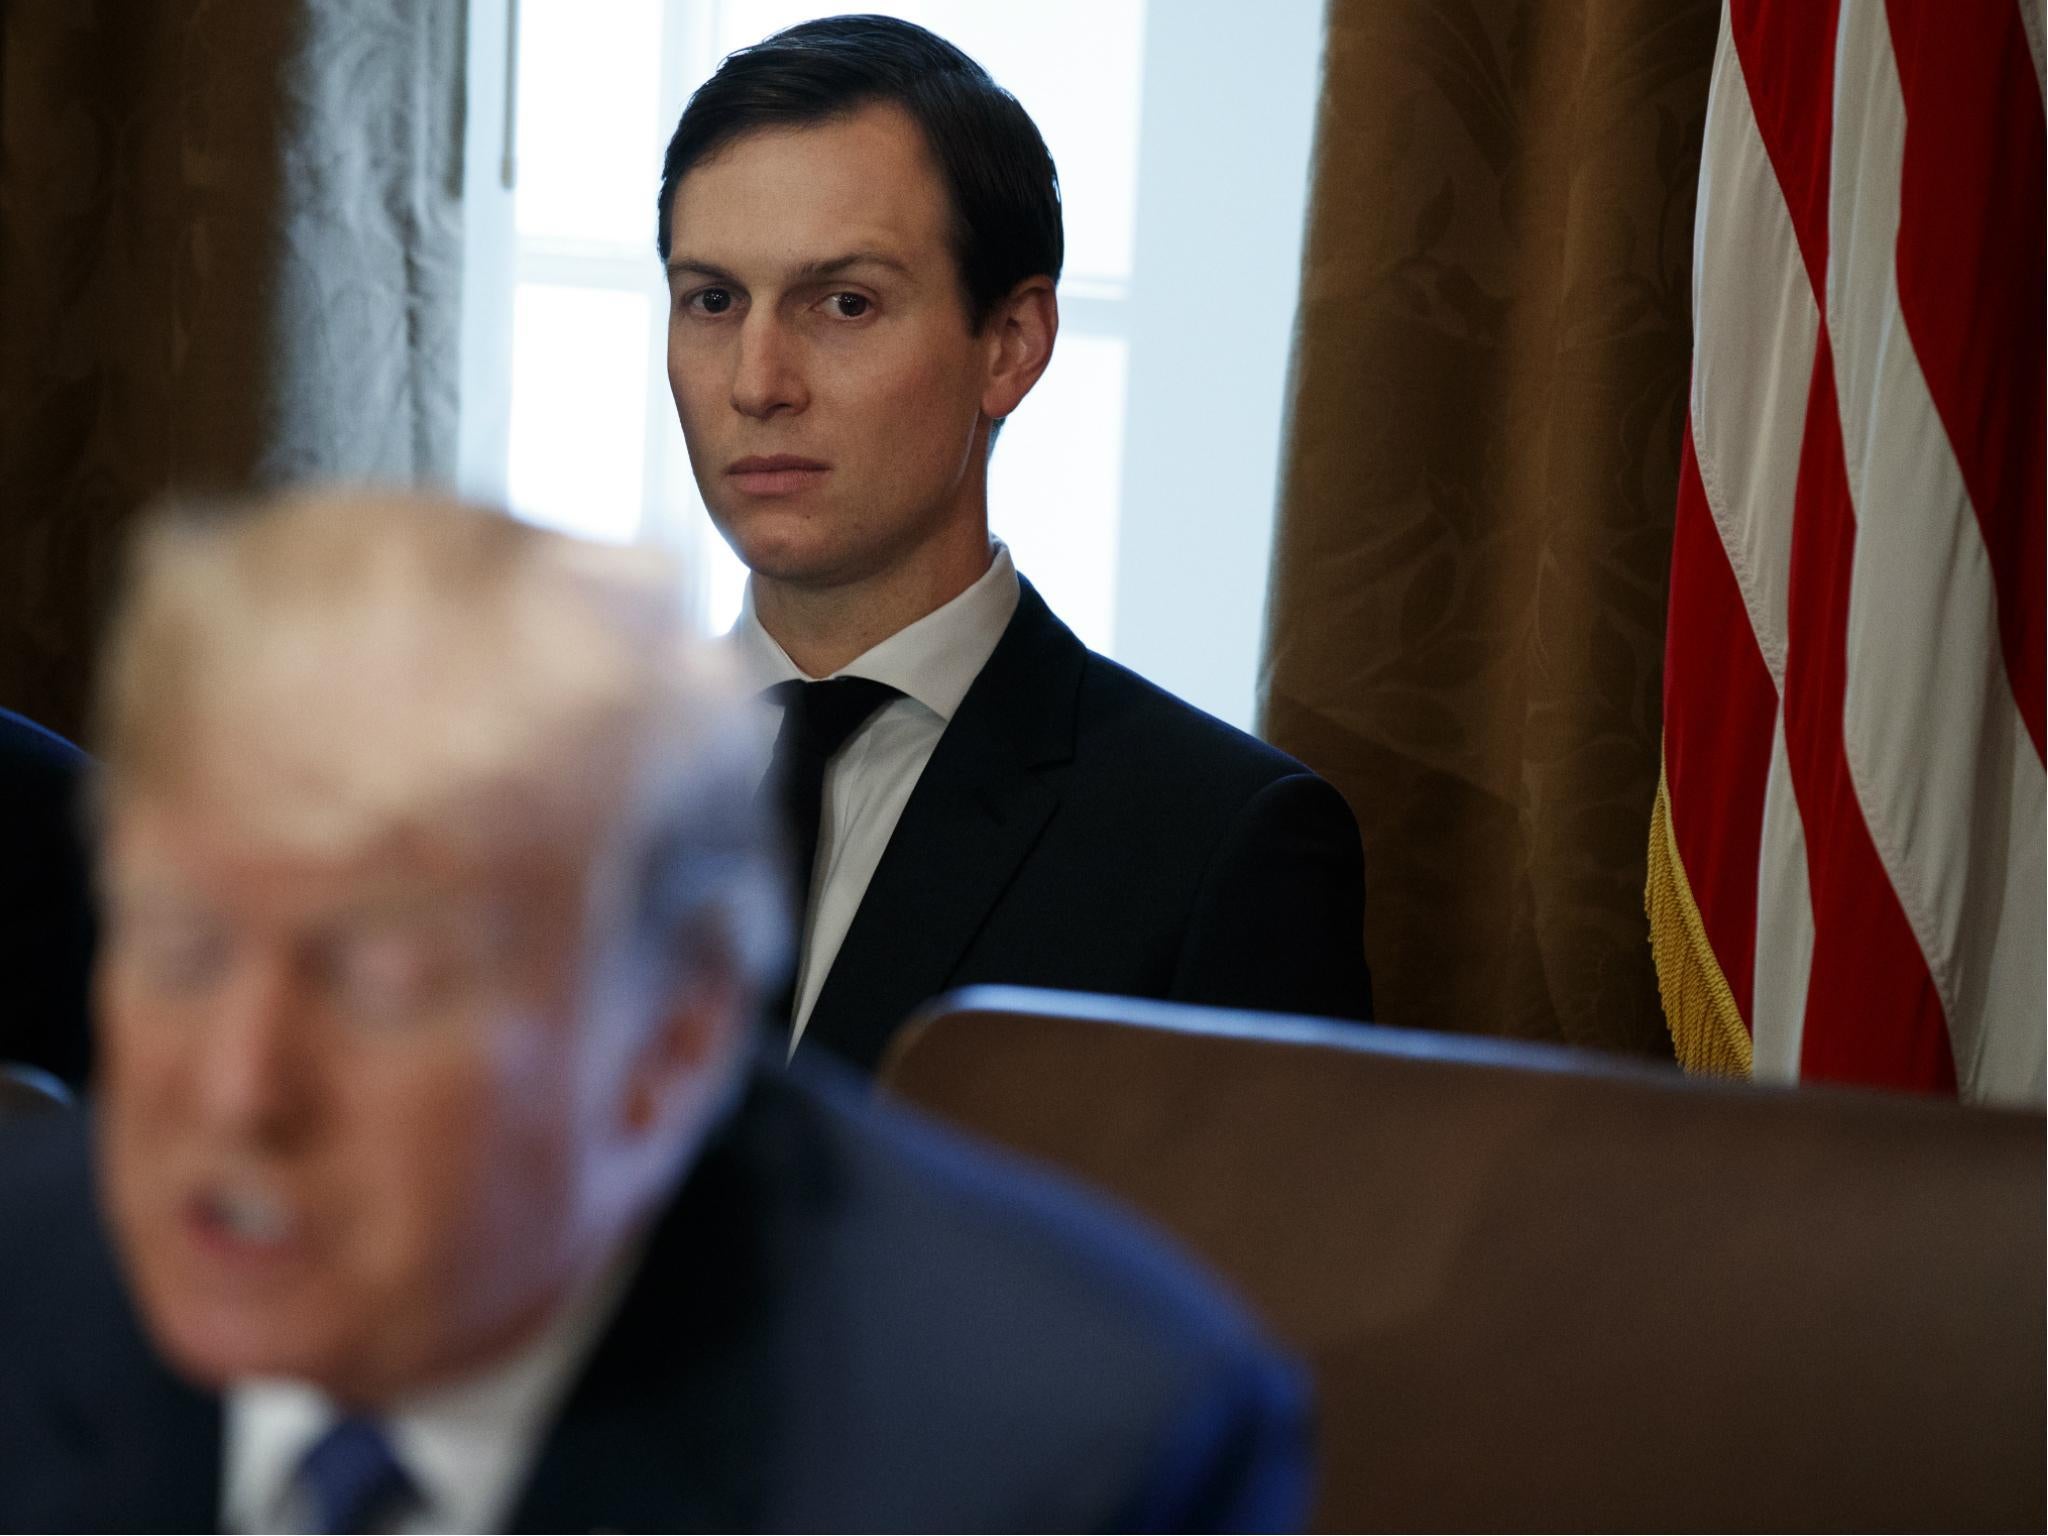 Jared Kushner denies any collusion with Russia